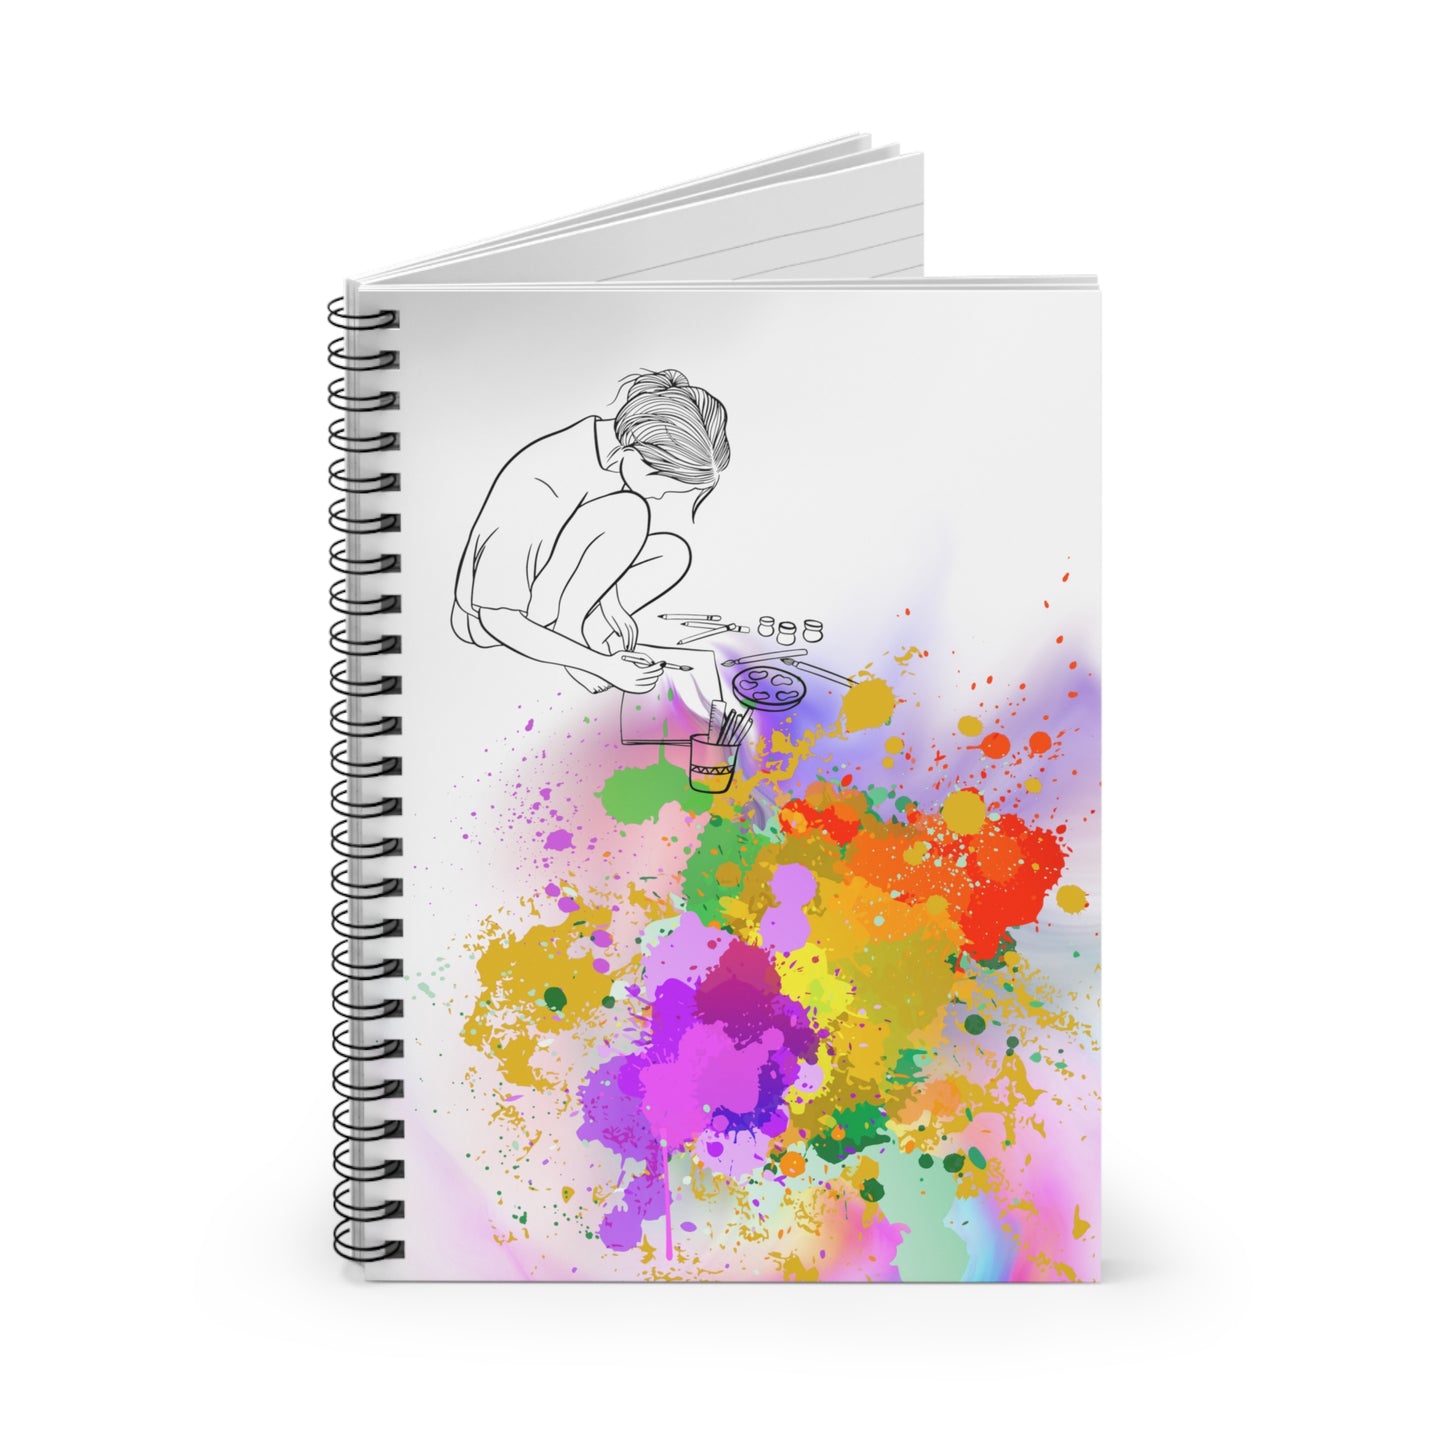 Dream Weaver: Spiral Notebook - Log Books - Journals - Diaries - and More Custom Printed by TheGlassyLass